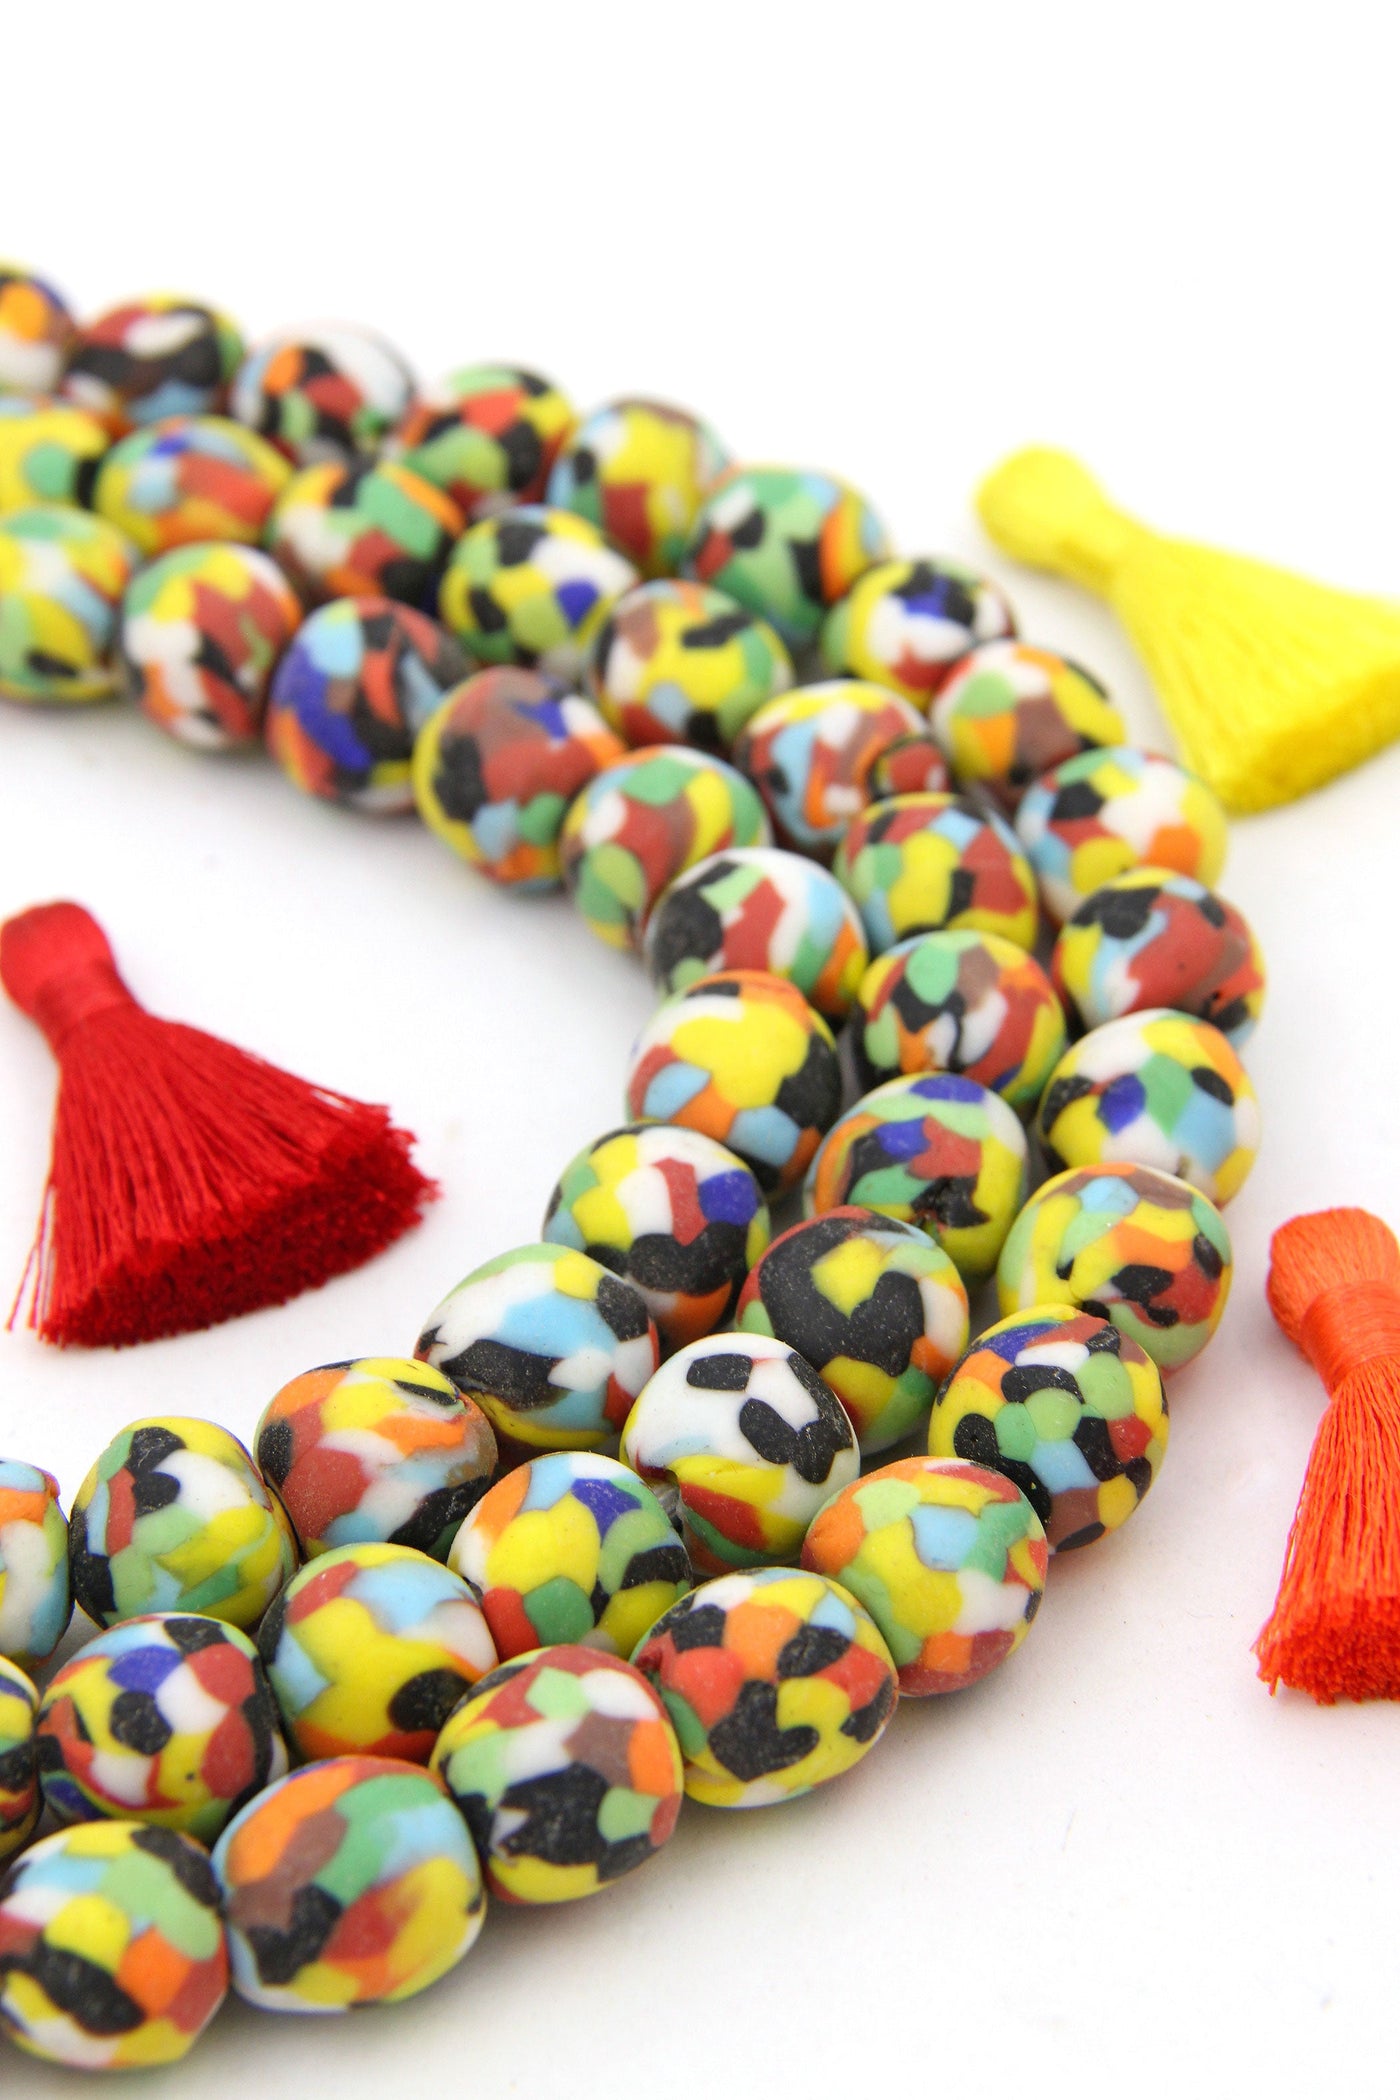 Bright Medley Fused Recycled Glass Beads 14mm: Eco-Friendly Beads